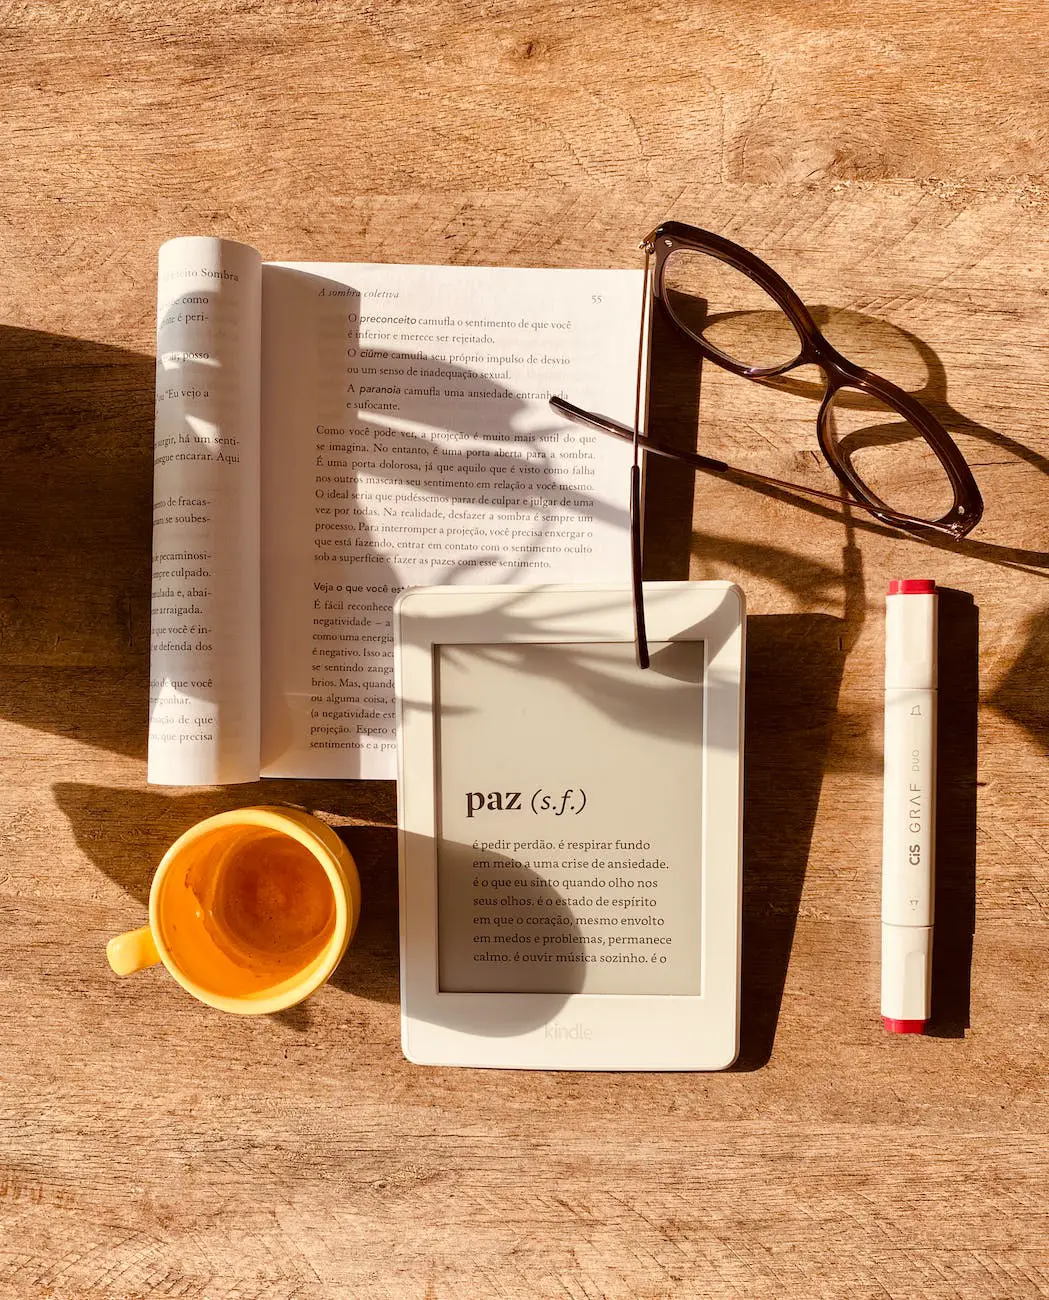 e book reader with tea and glasses